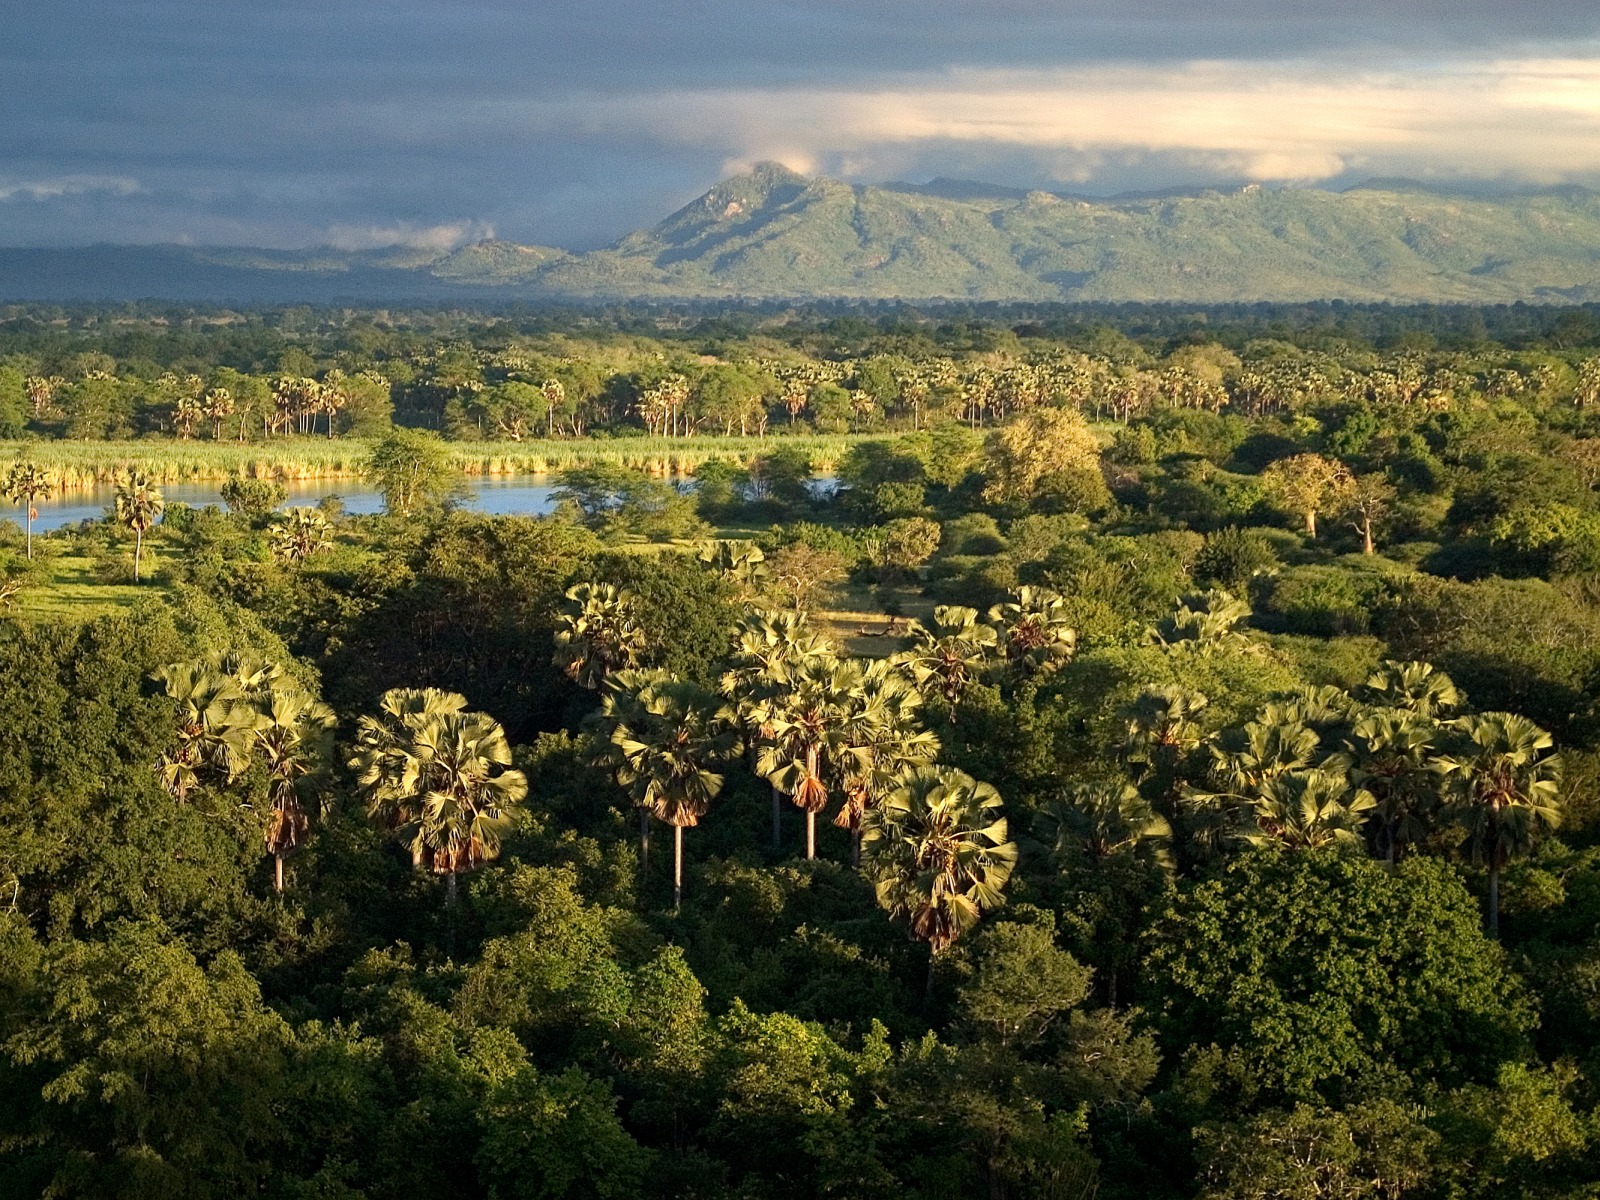 Liwonde - Explore the highlights of Malawi